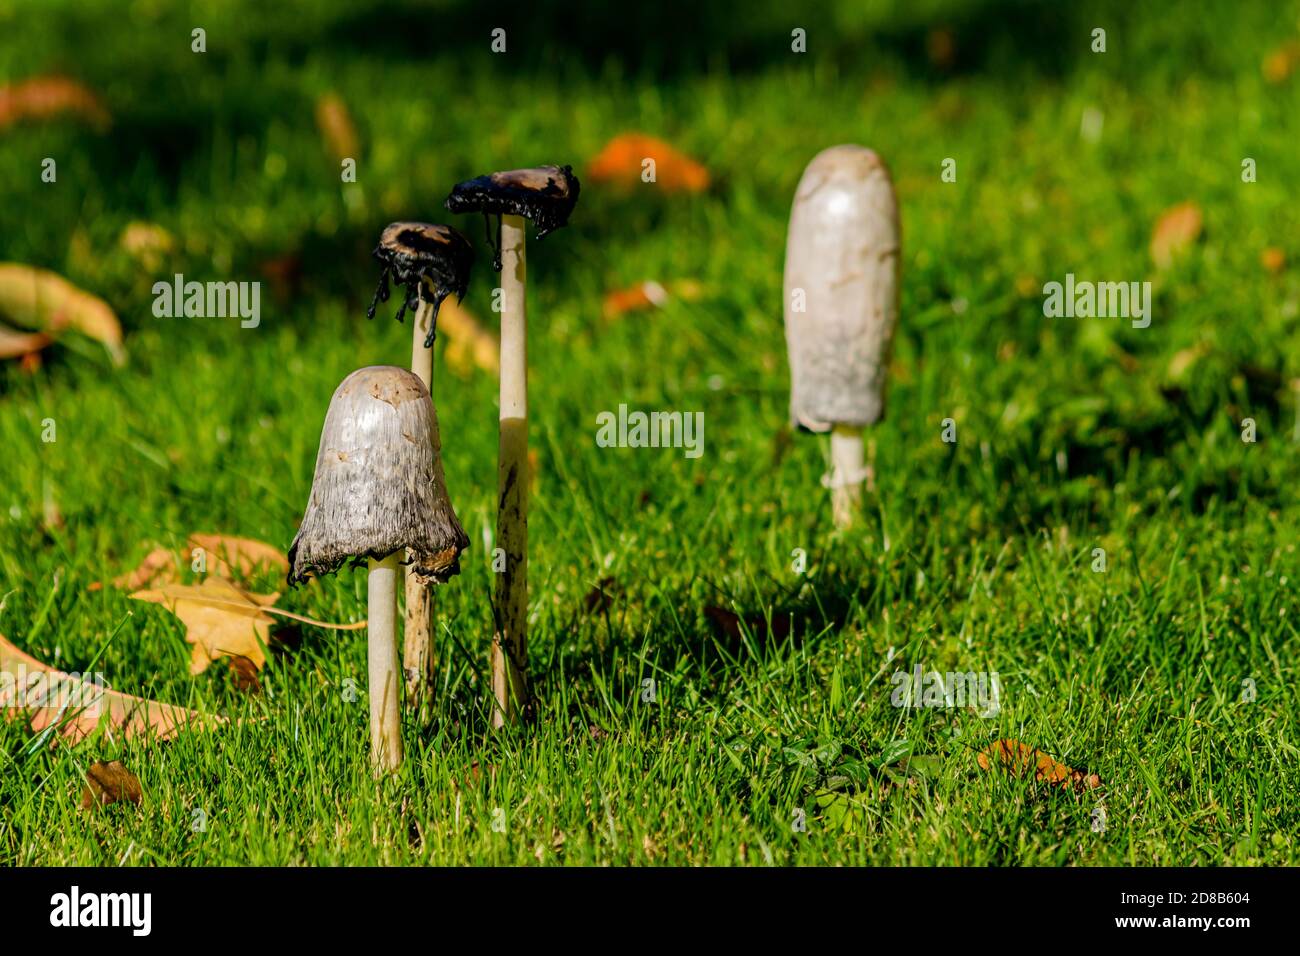 Shaggy ink cap mushroom coprinopsis atramentaria group surrounded by fallen leafes, moody autumnal picture showing muchrooms together in warm colors Stock Photo